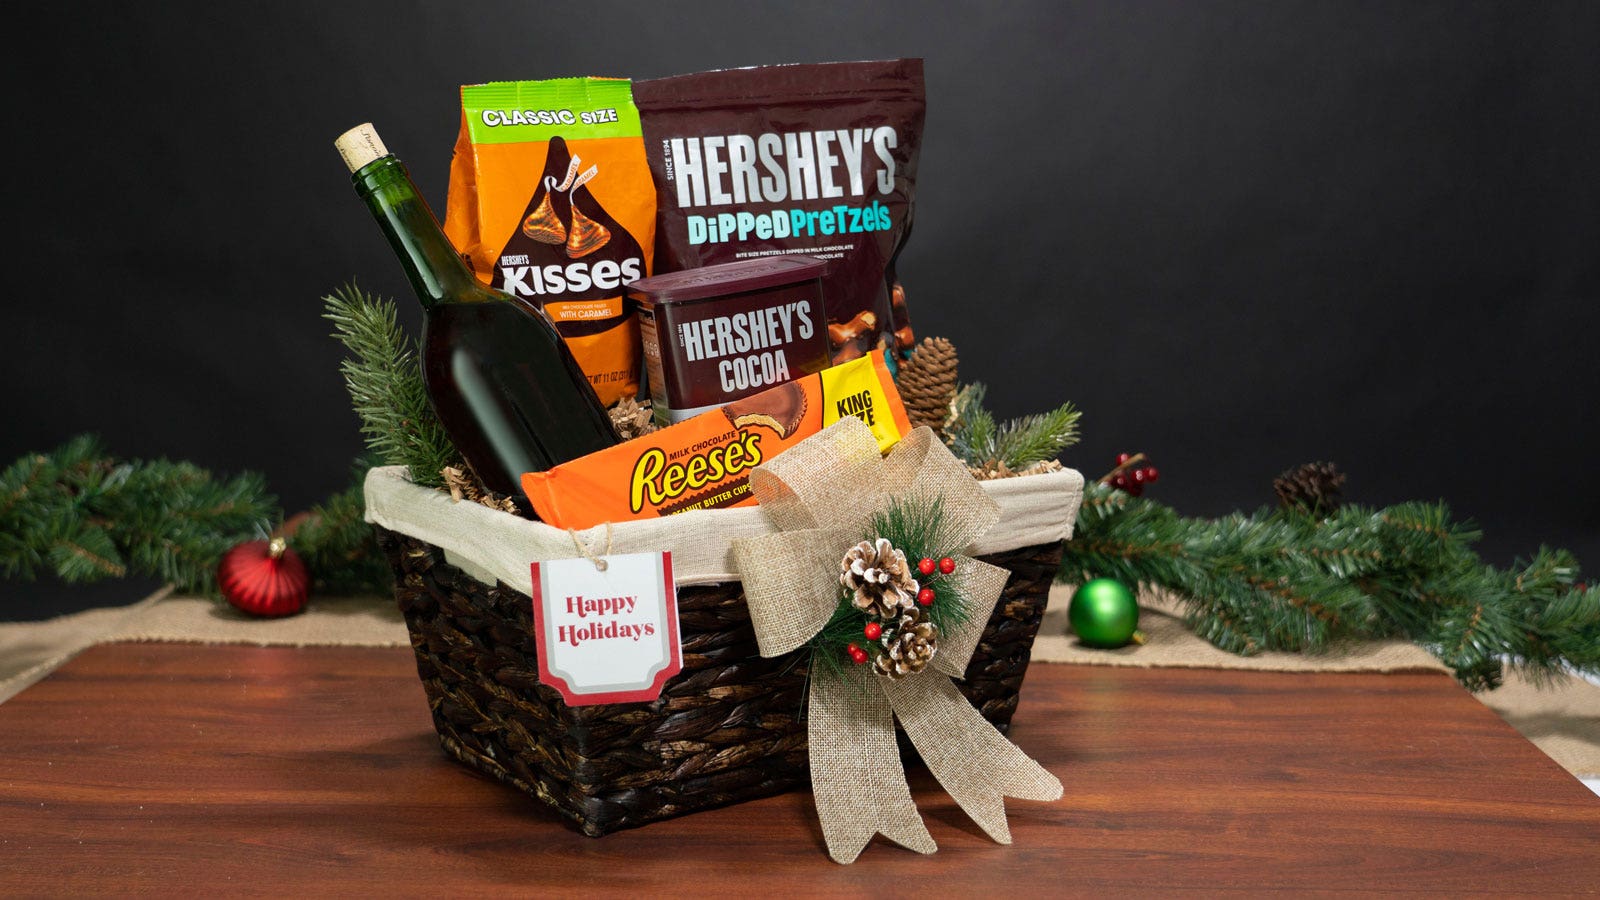 How to Pack and Choose Items for Holiday Gift Baskets